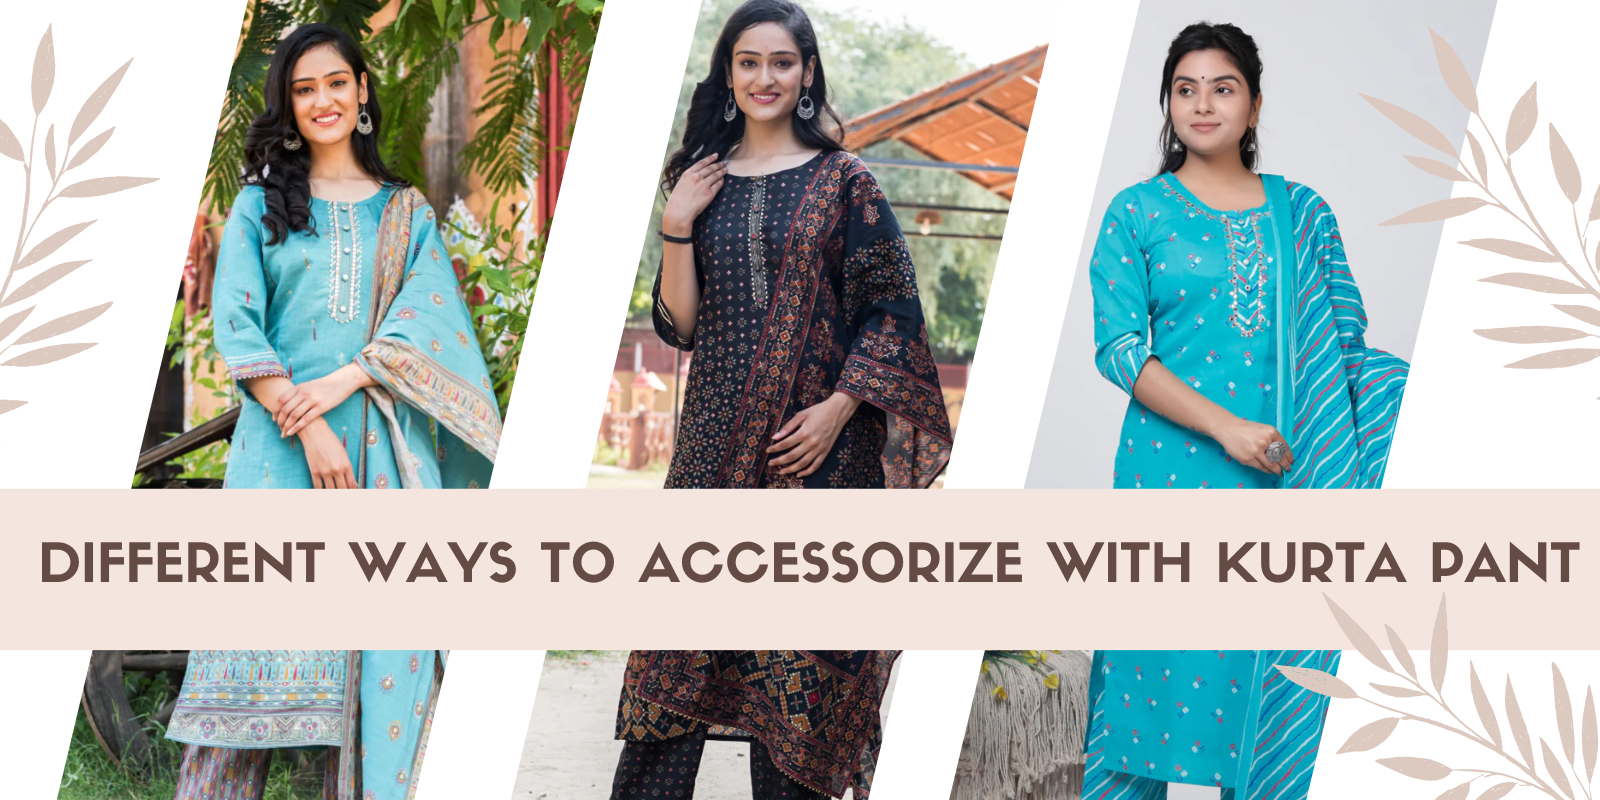 Different Ways to Accessorize with Kurta Pants for Women